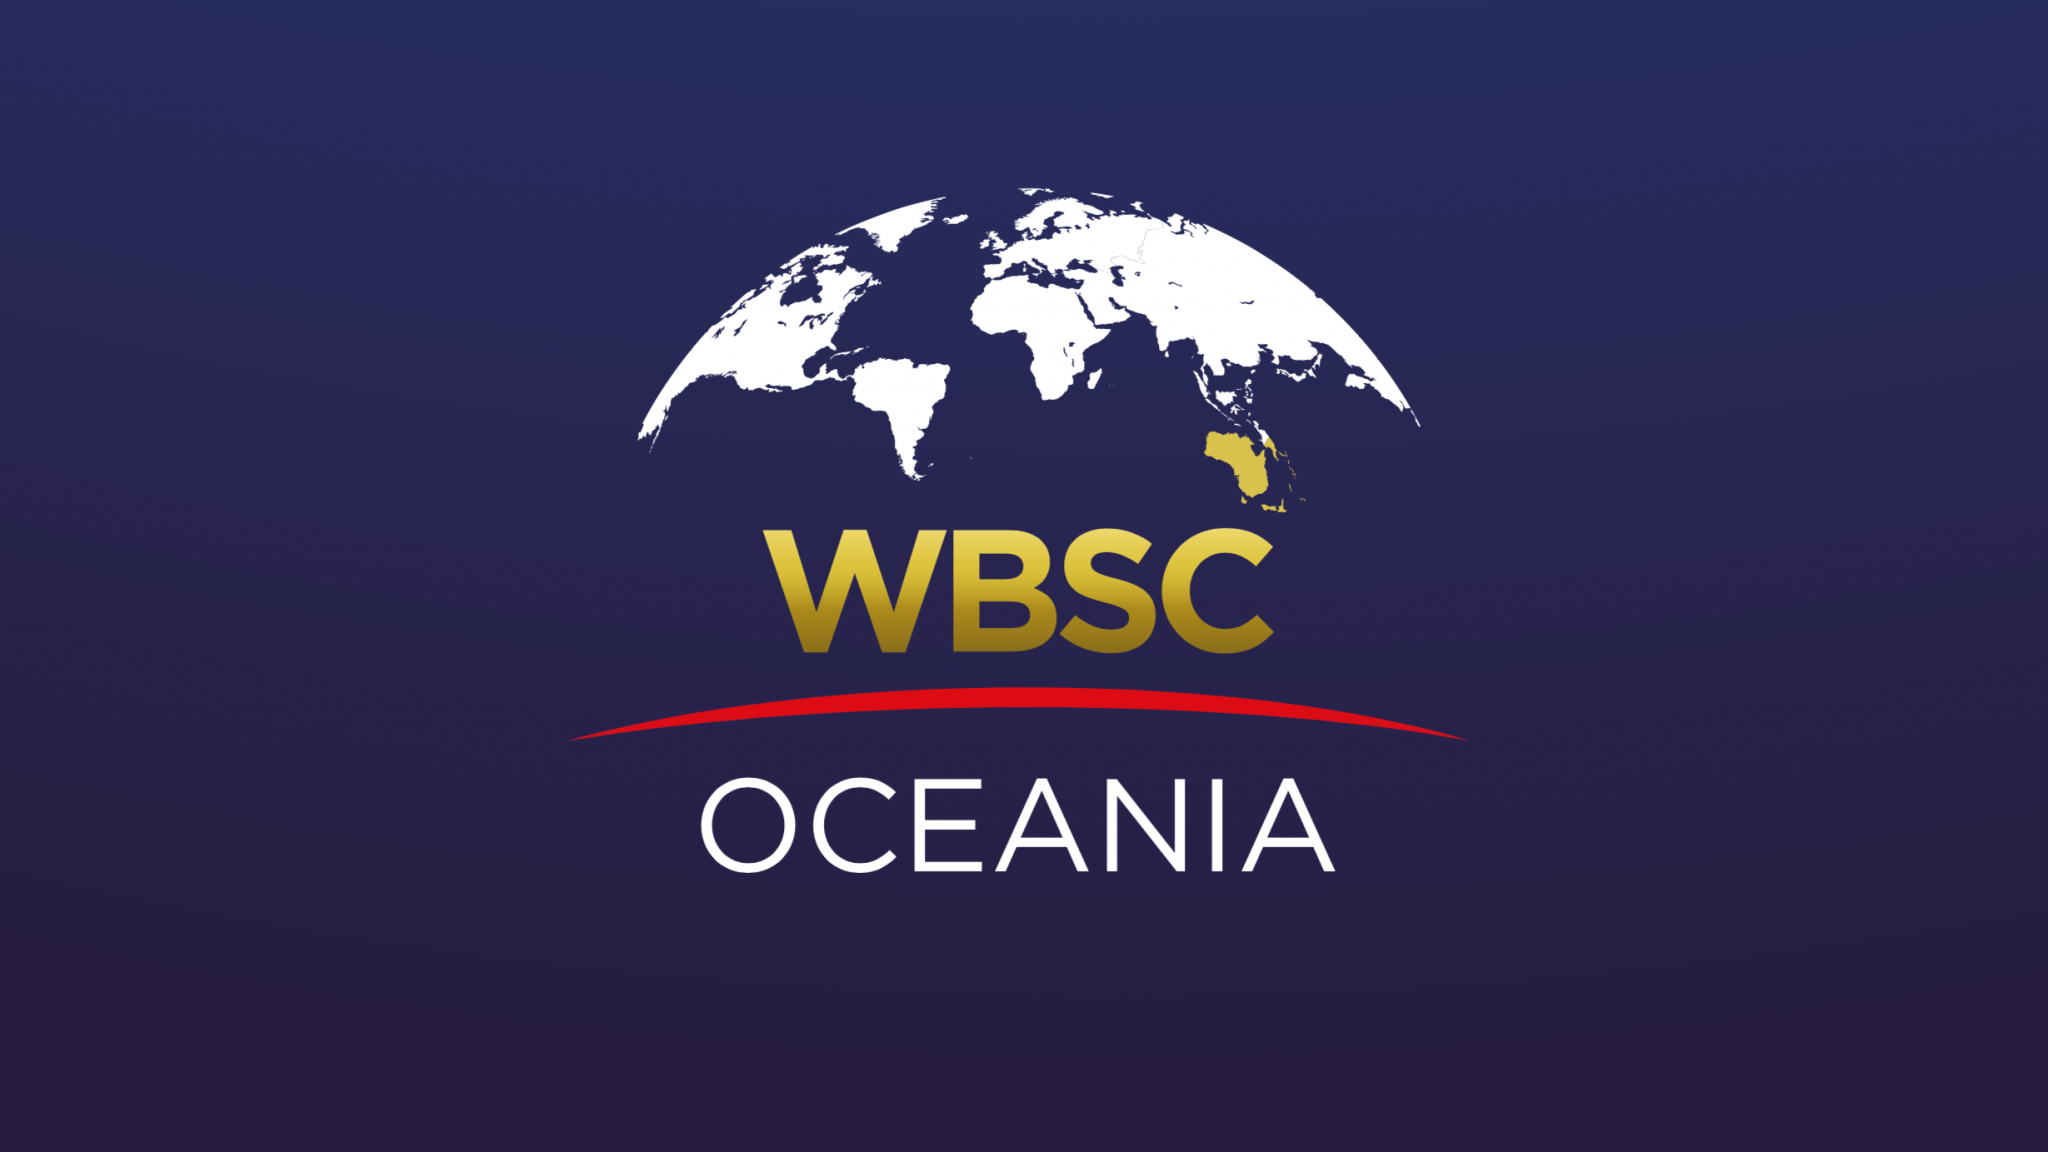 WBSC Oceania launched following merger of baseball and softball confederations